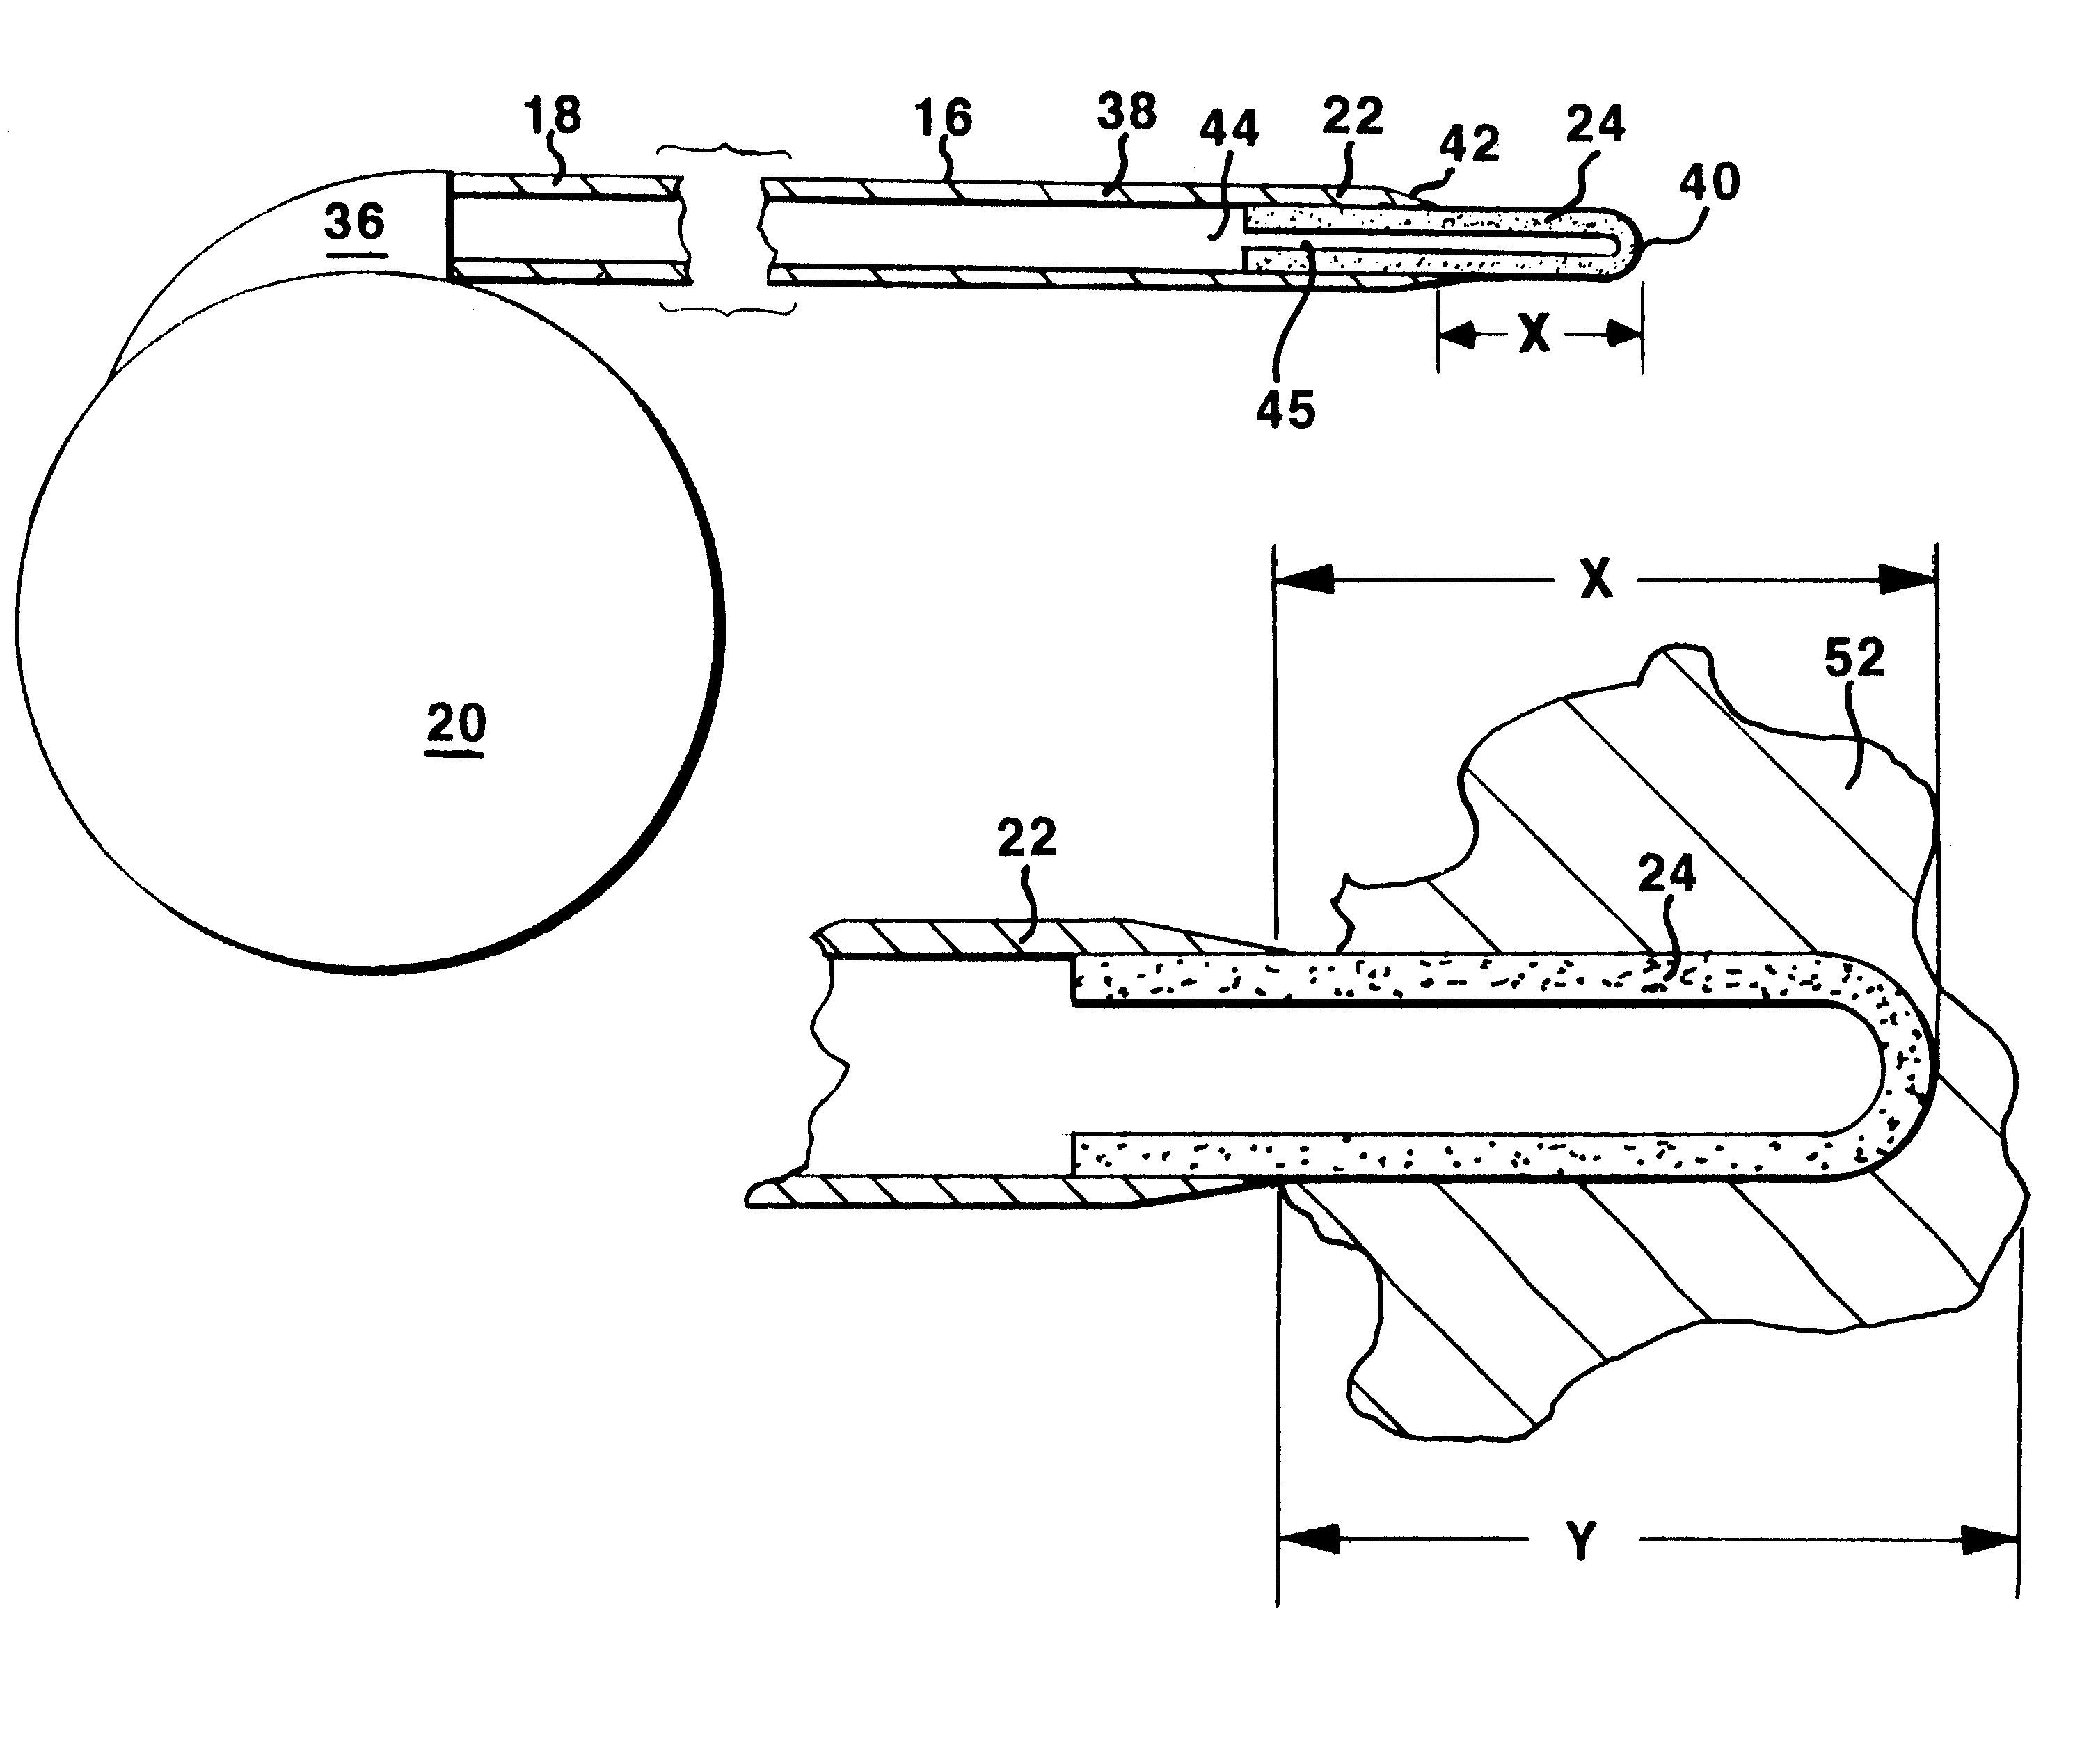 Method for manufacturing a catheter